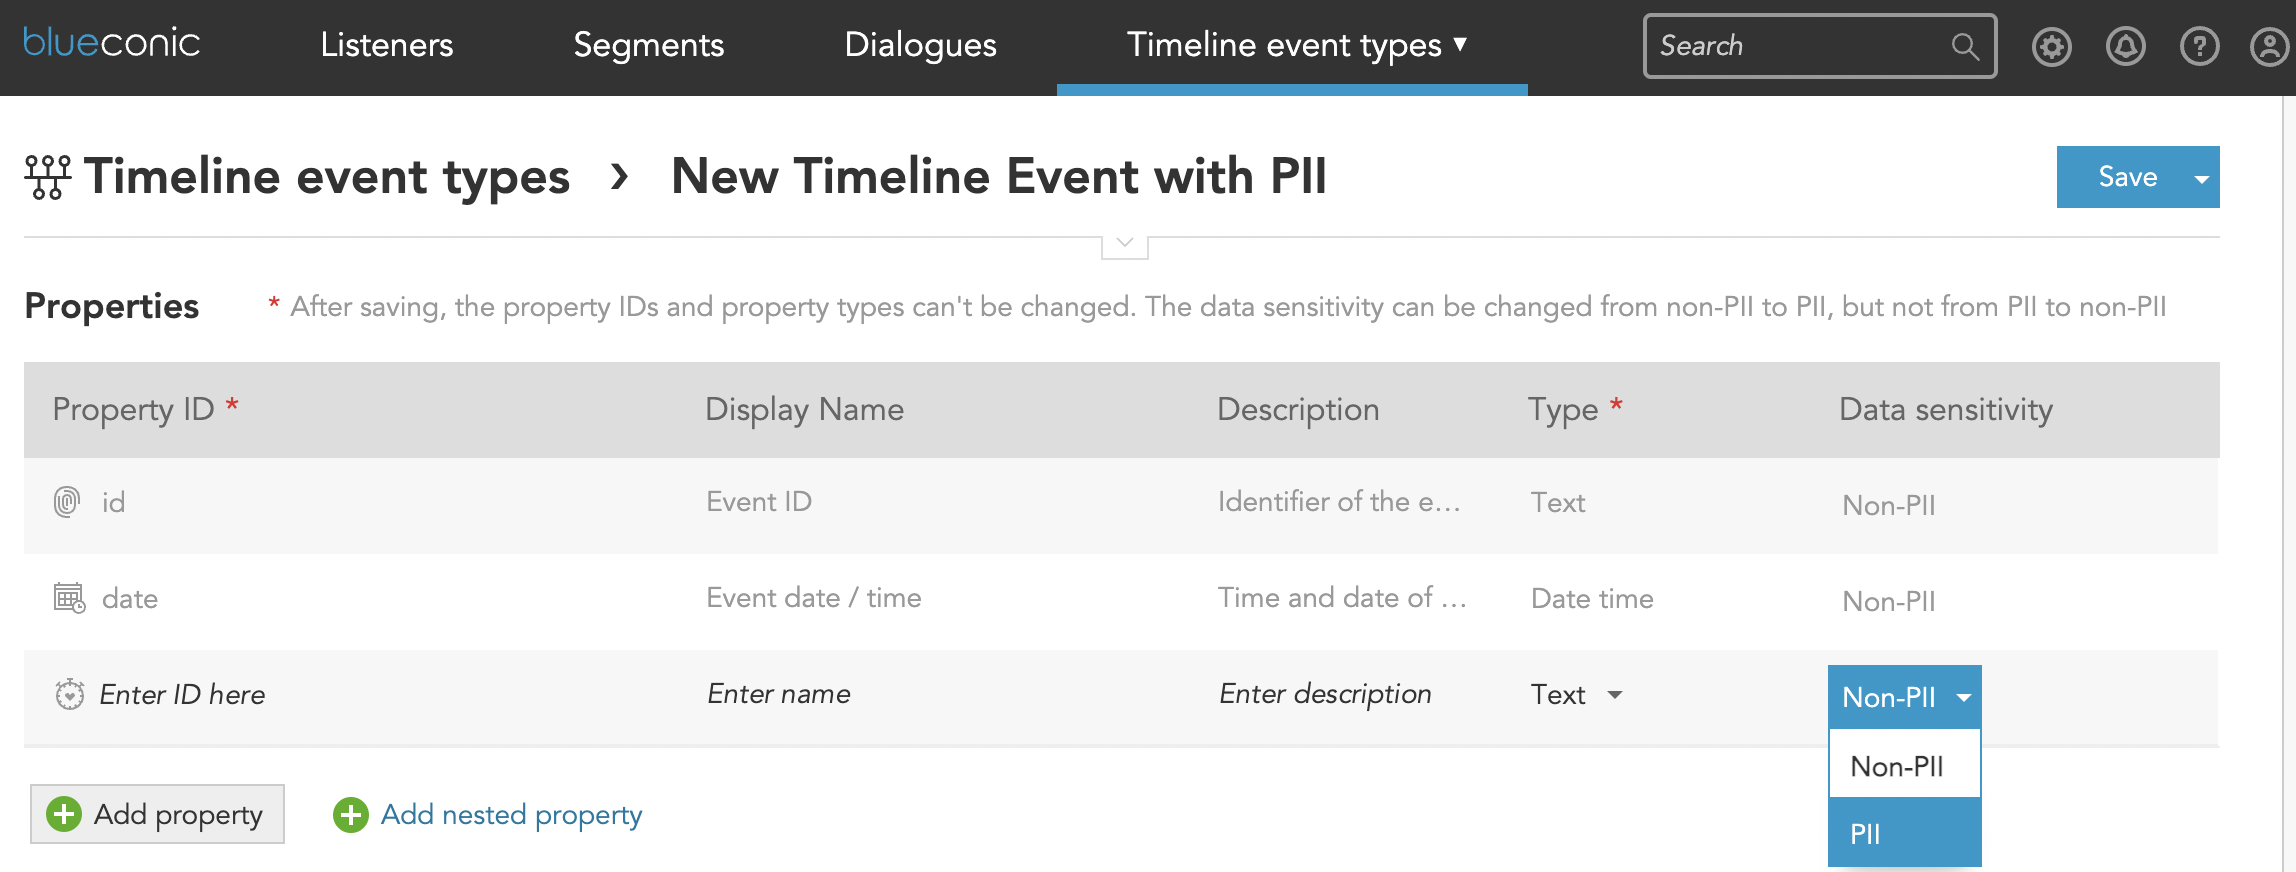 Timeline_event_type_with_PII.png